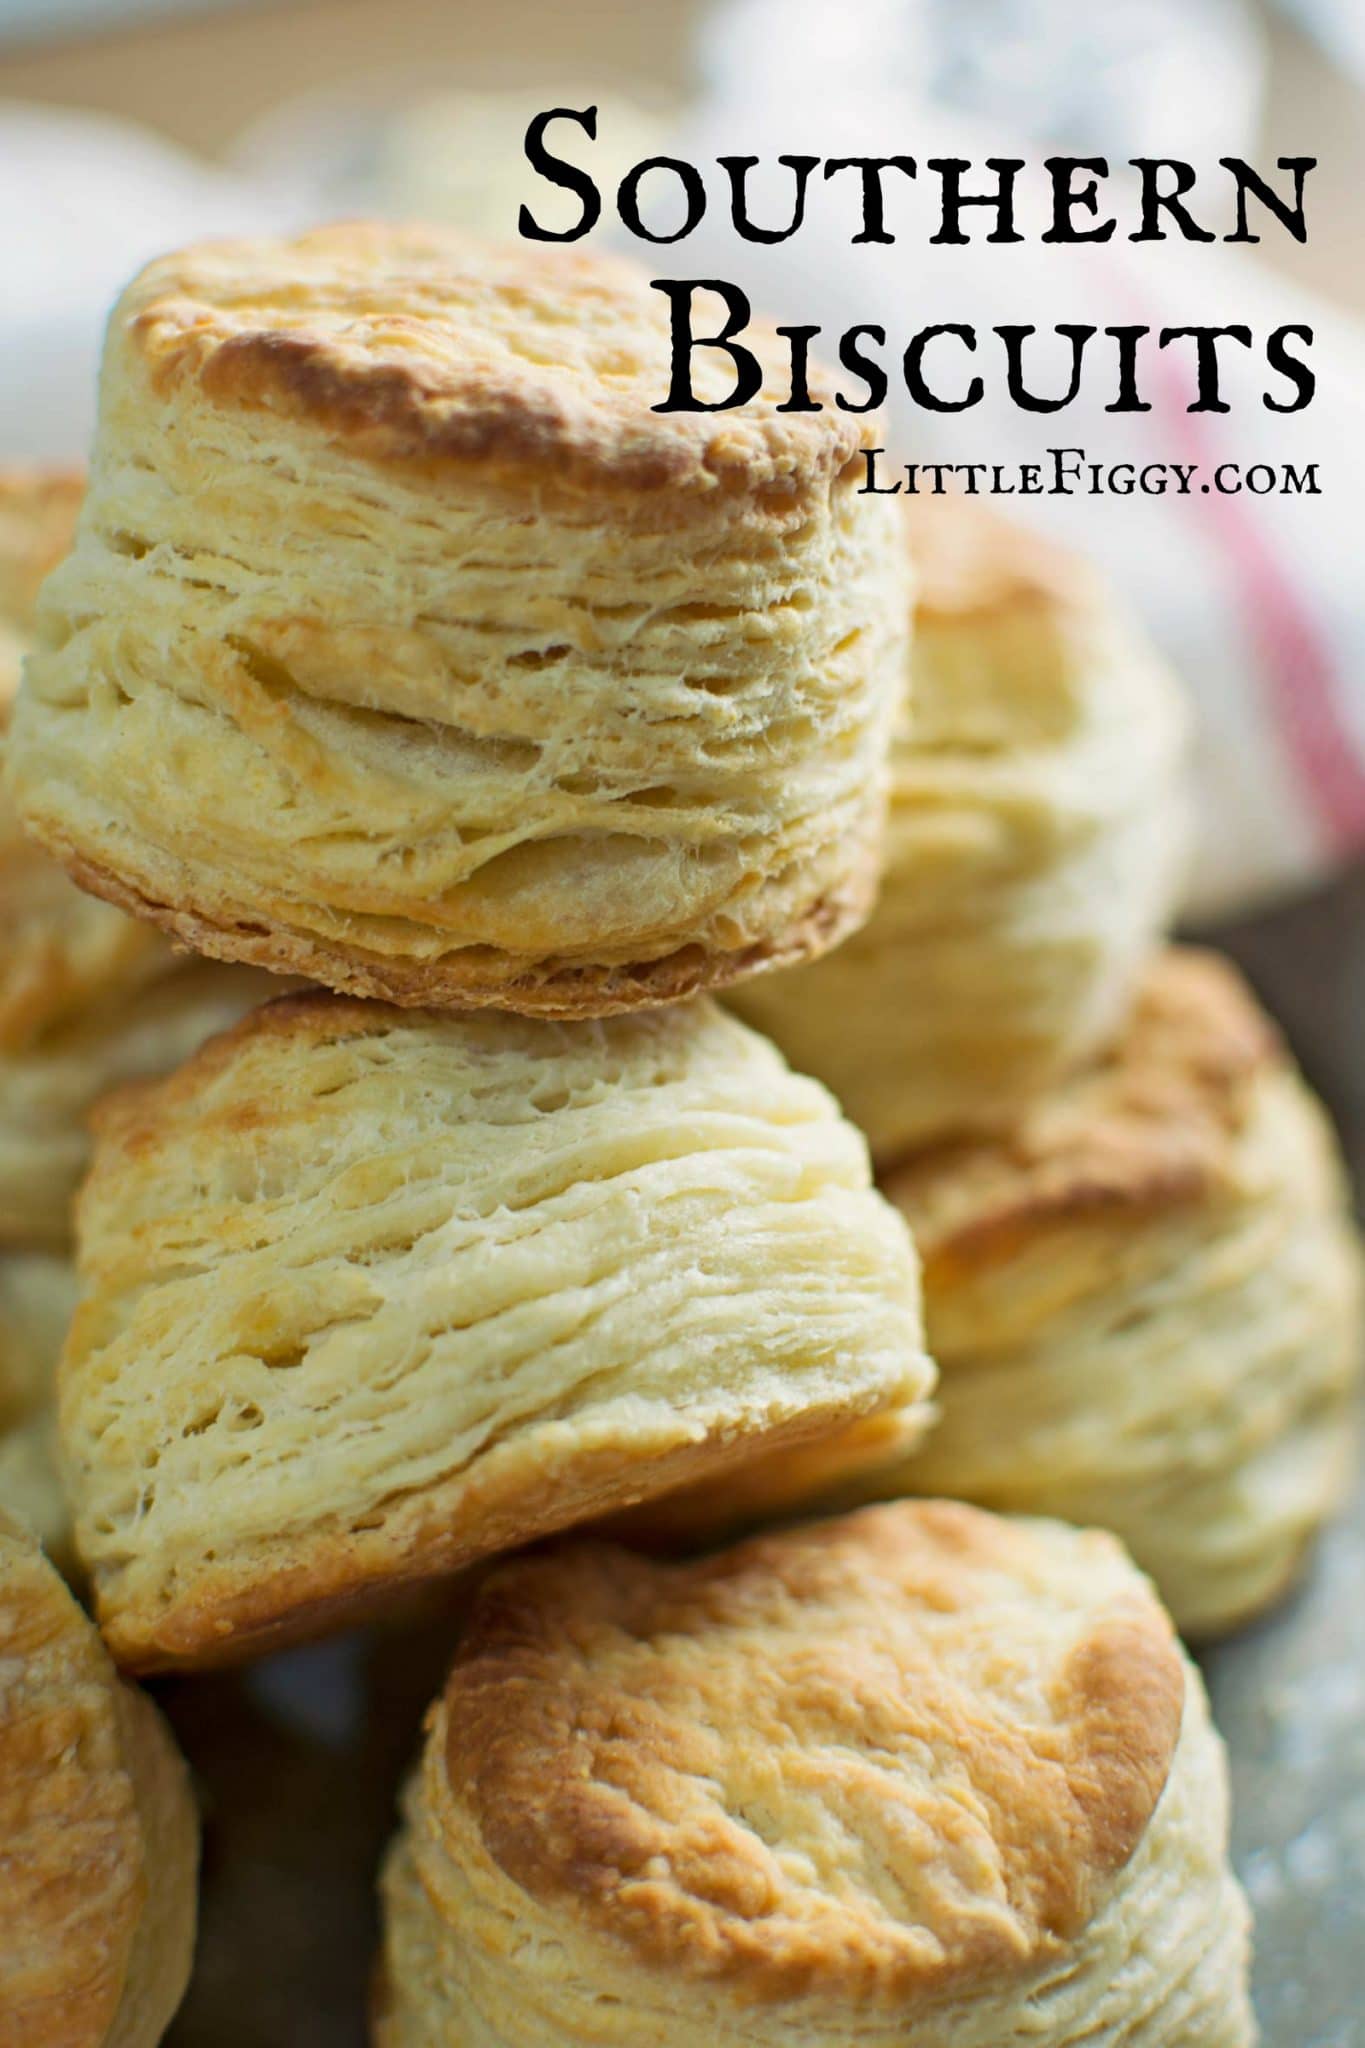 How to Make Layered Southern Biscuits - Little Figgy Food